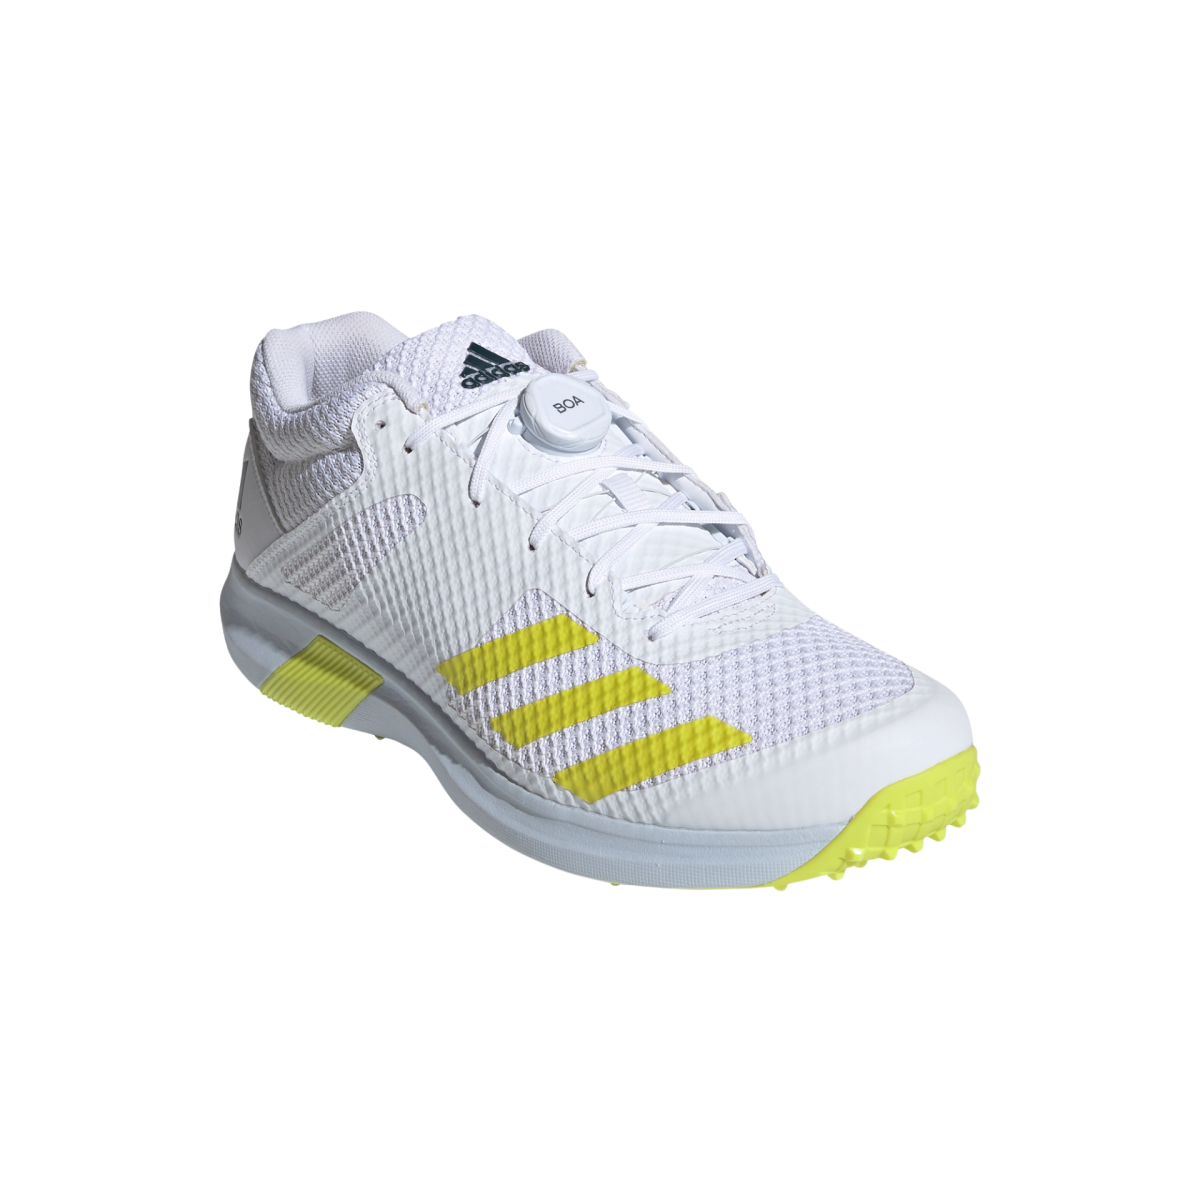 Adidas Adipower Vector Mid Spike Cricket Shoes